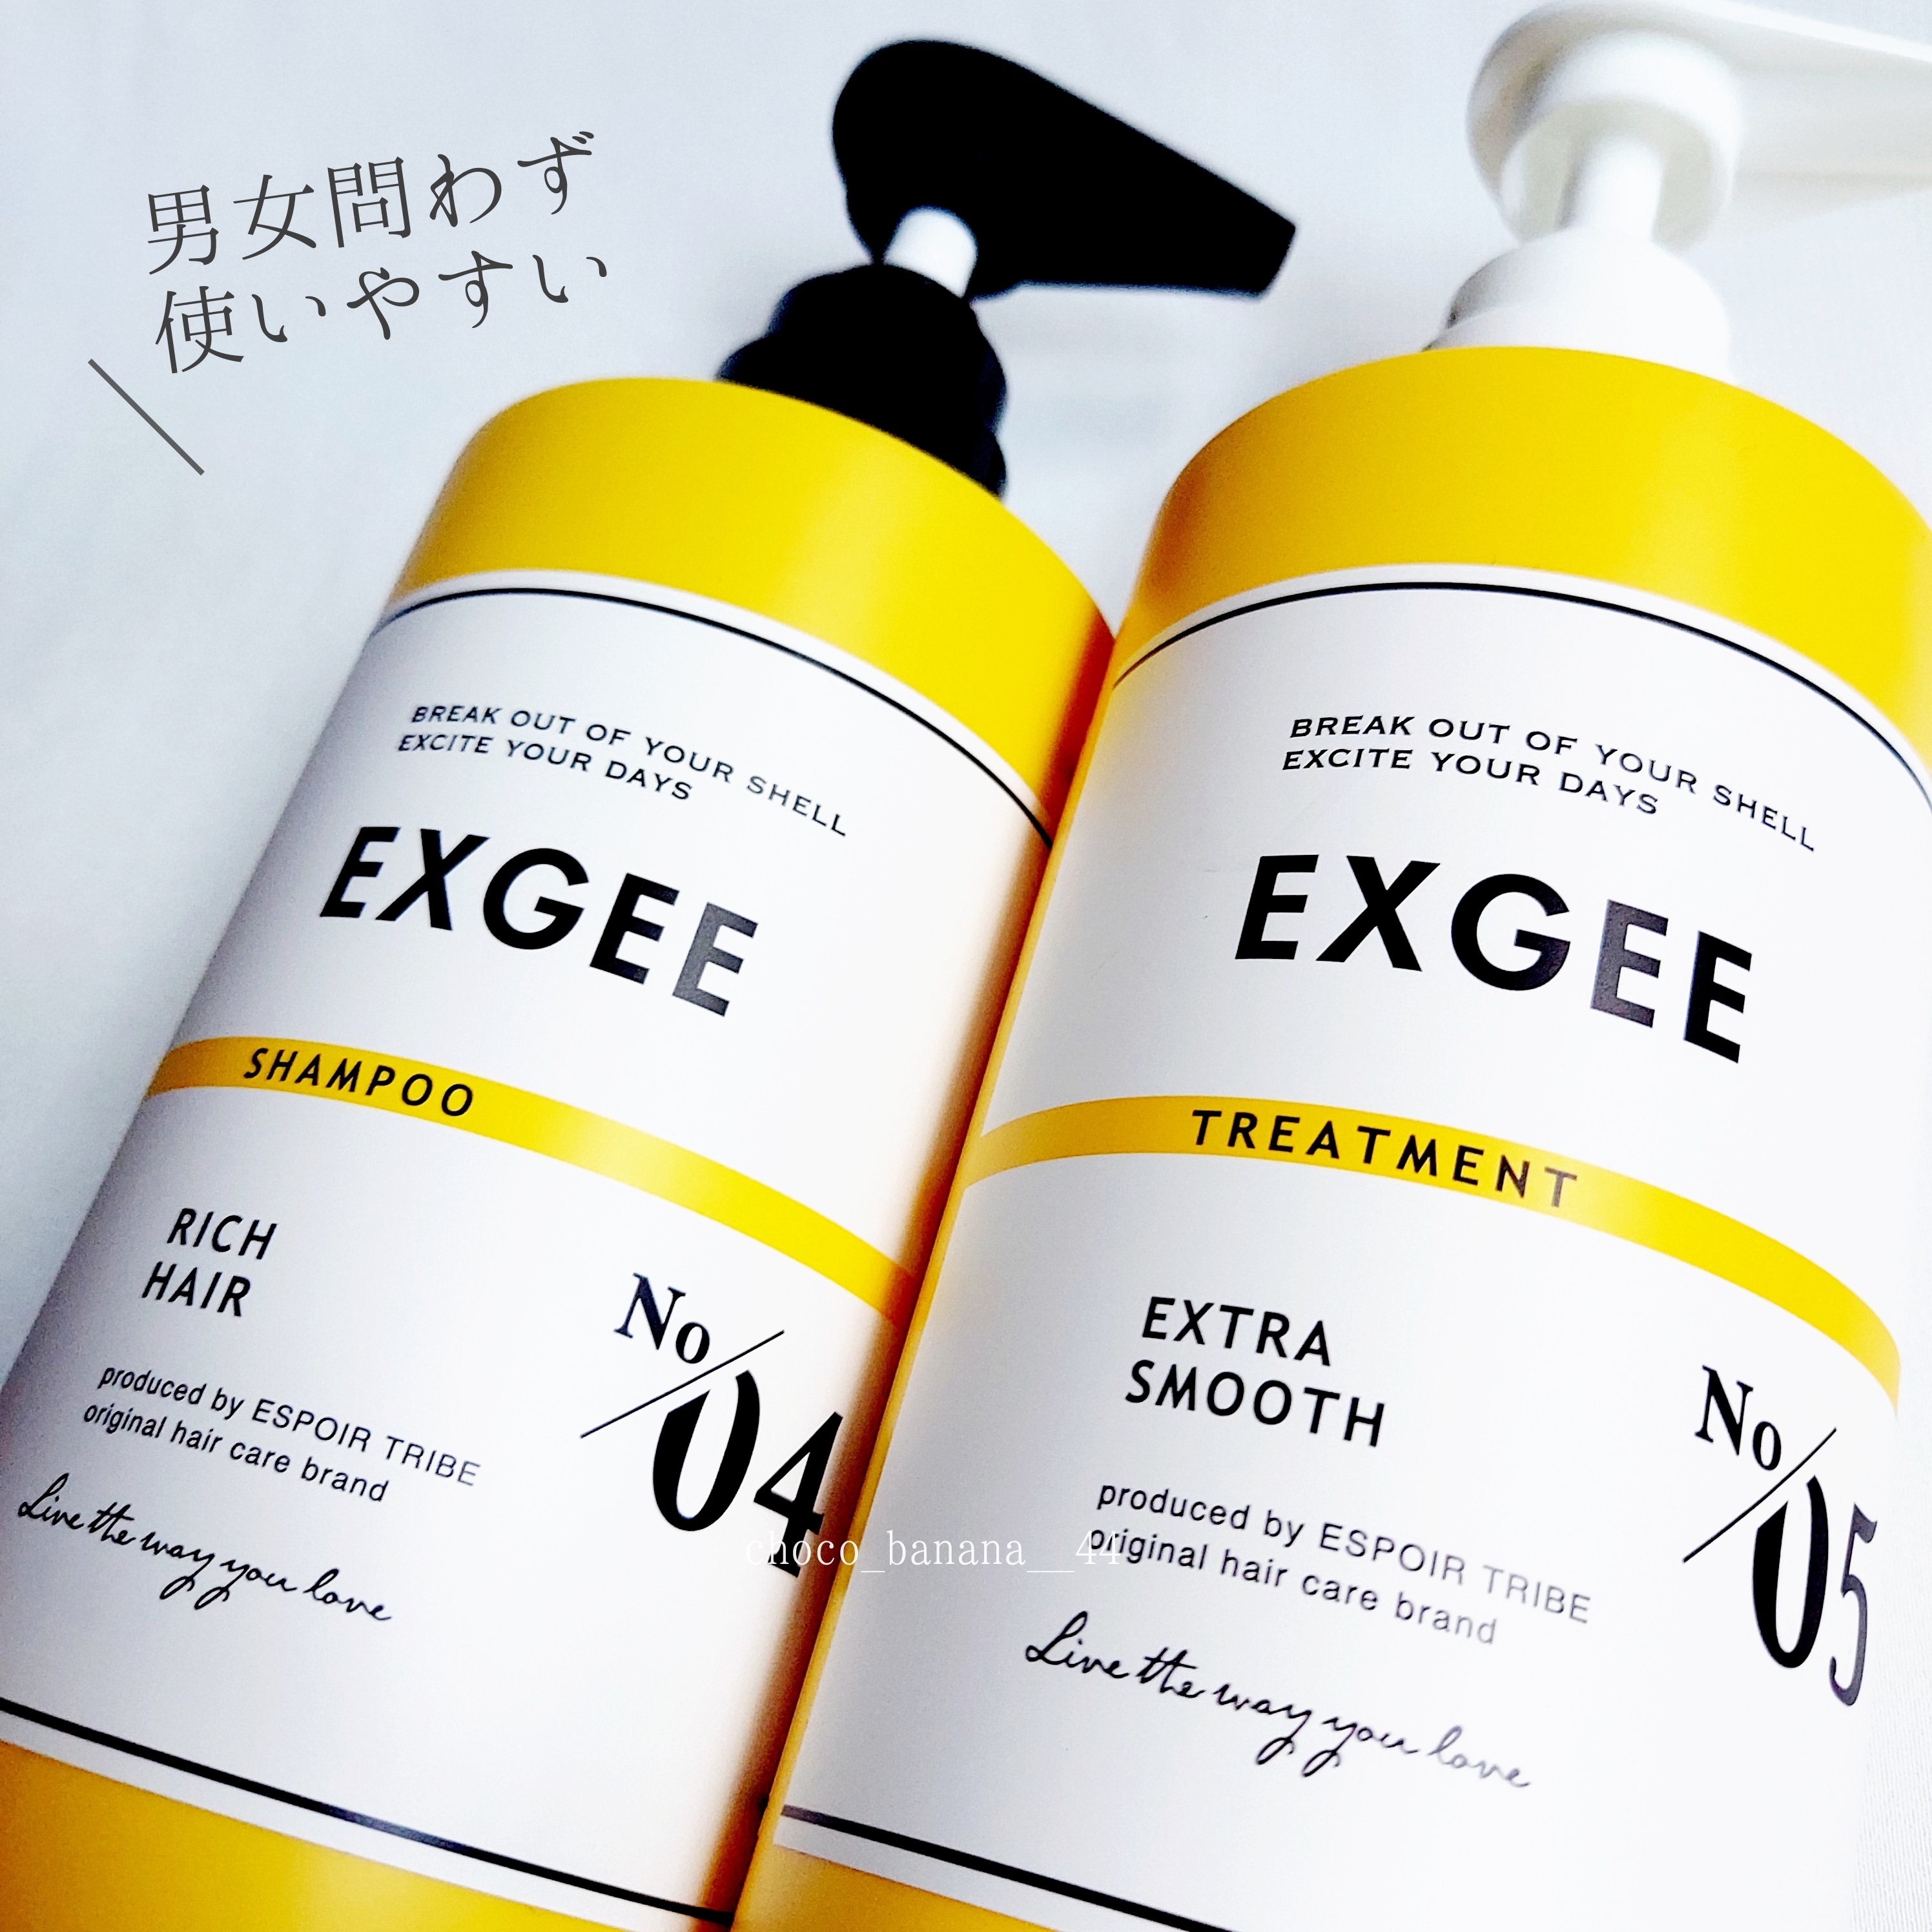 EXGEE
EXGEEシャンプー／EXGEEトリートメントを使ったししさんのクチコミ画像1